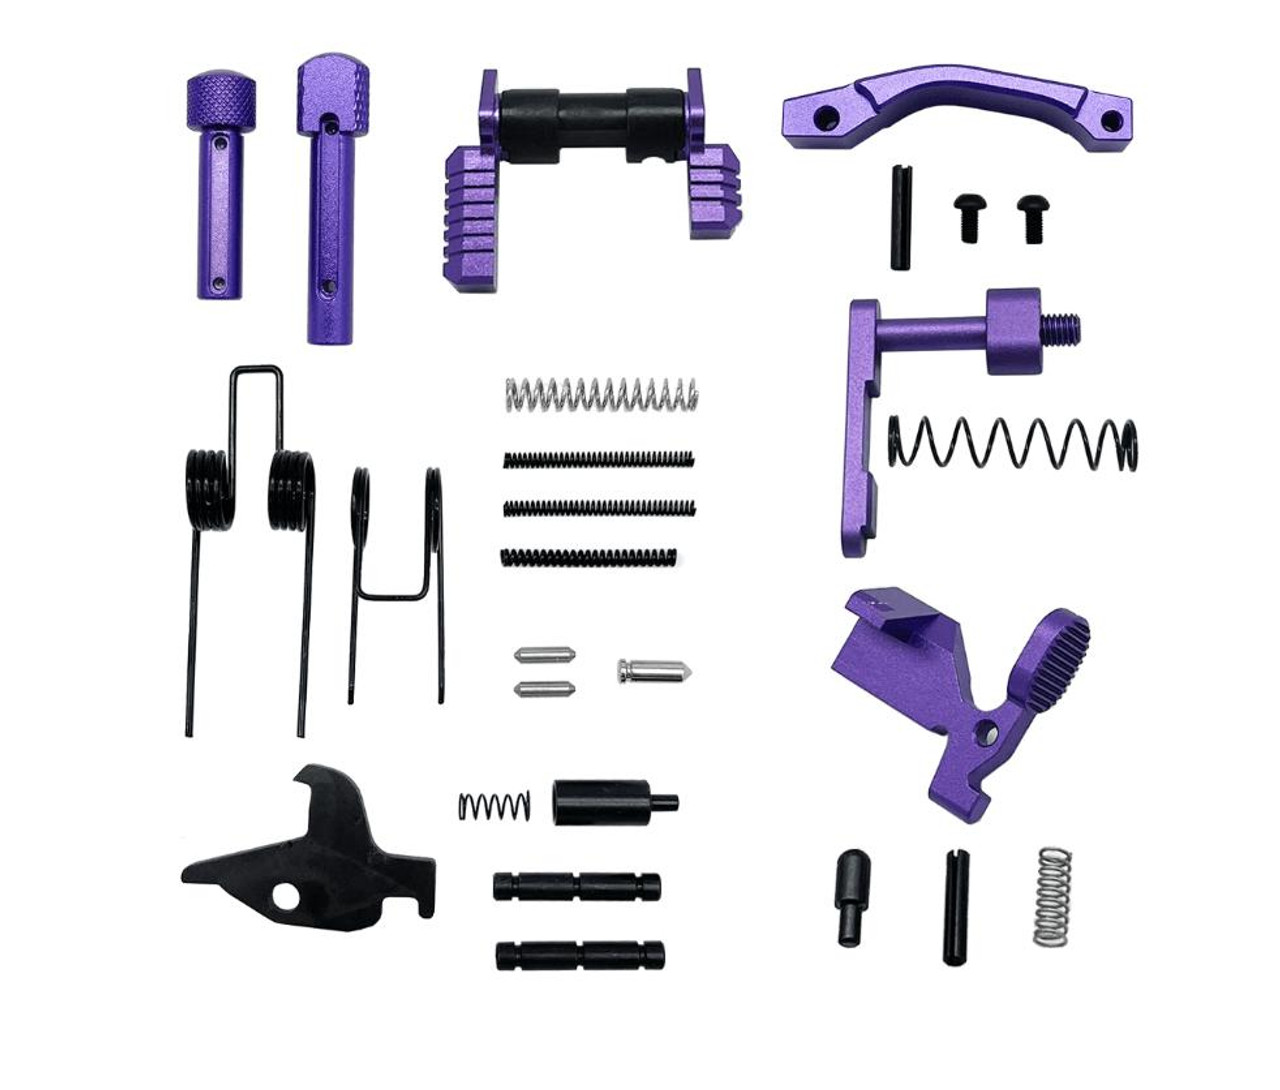 MCS AR-15 Lower Parts Kit Except Trigger, Hammer, and Grip Anodized Colors 